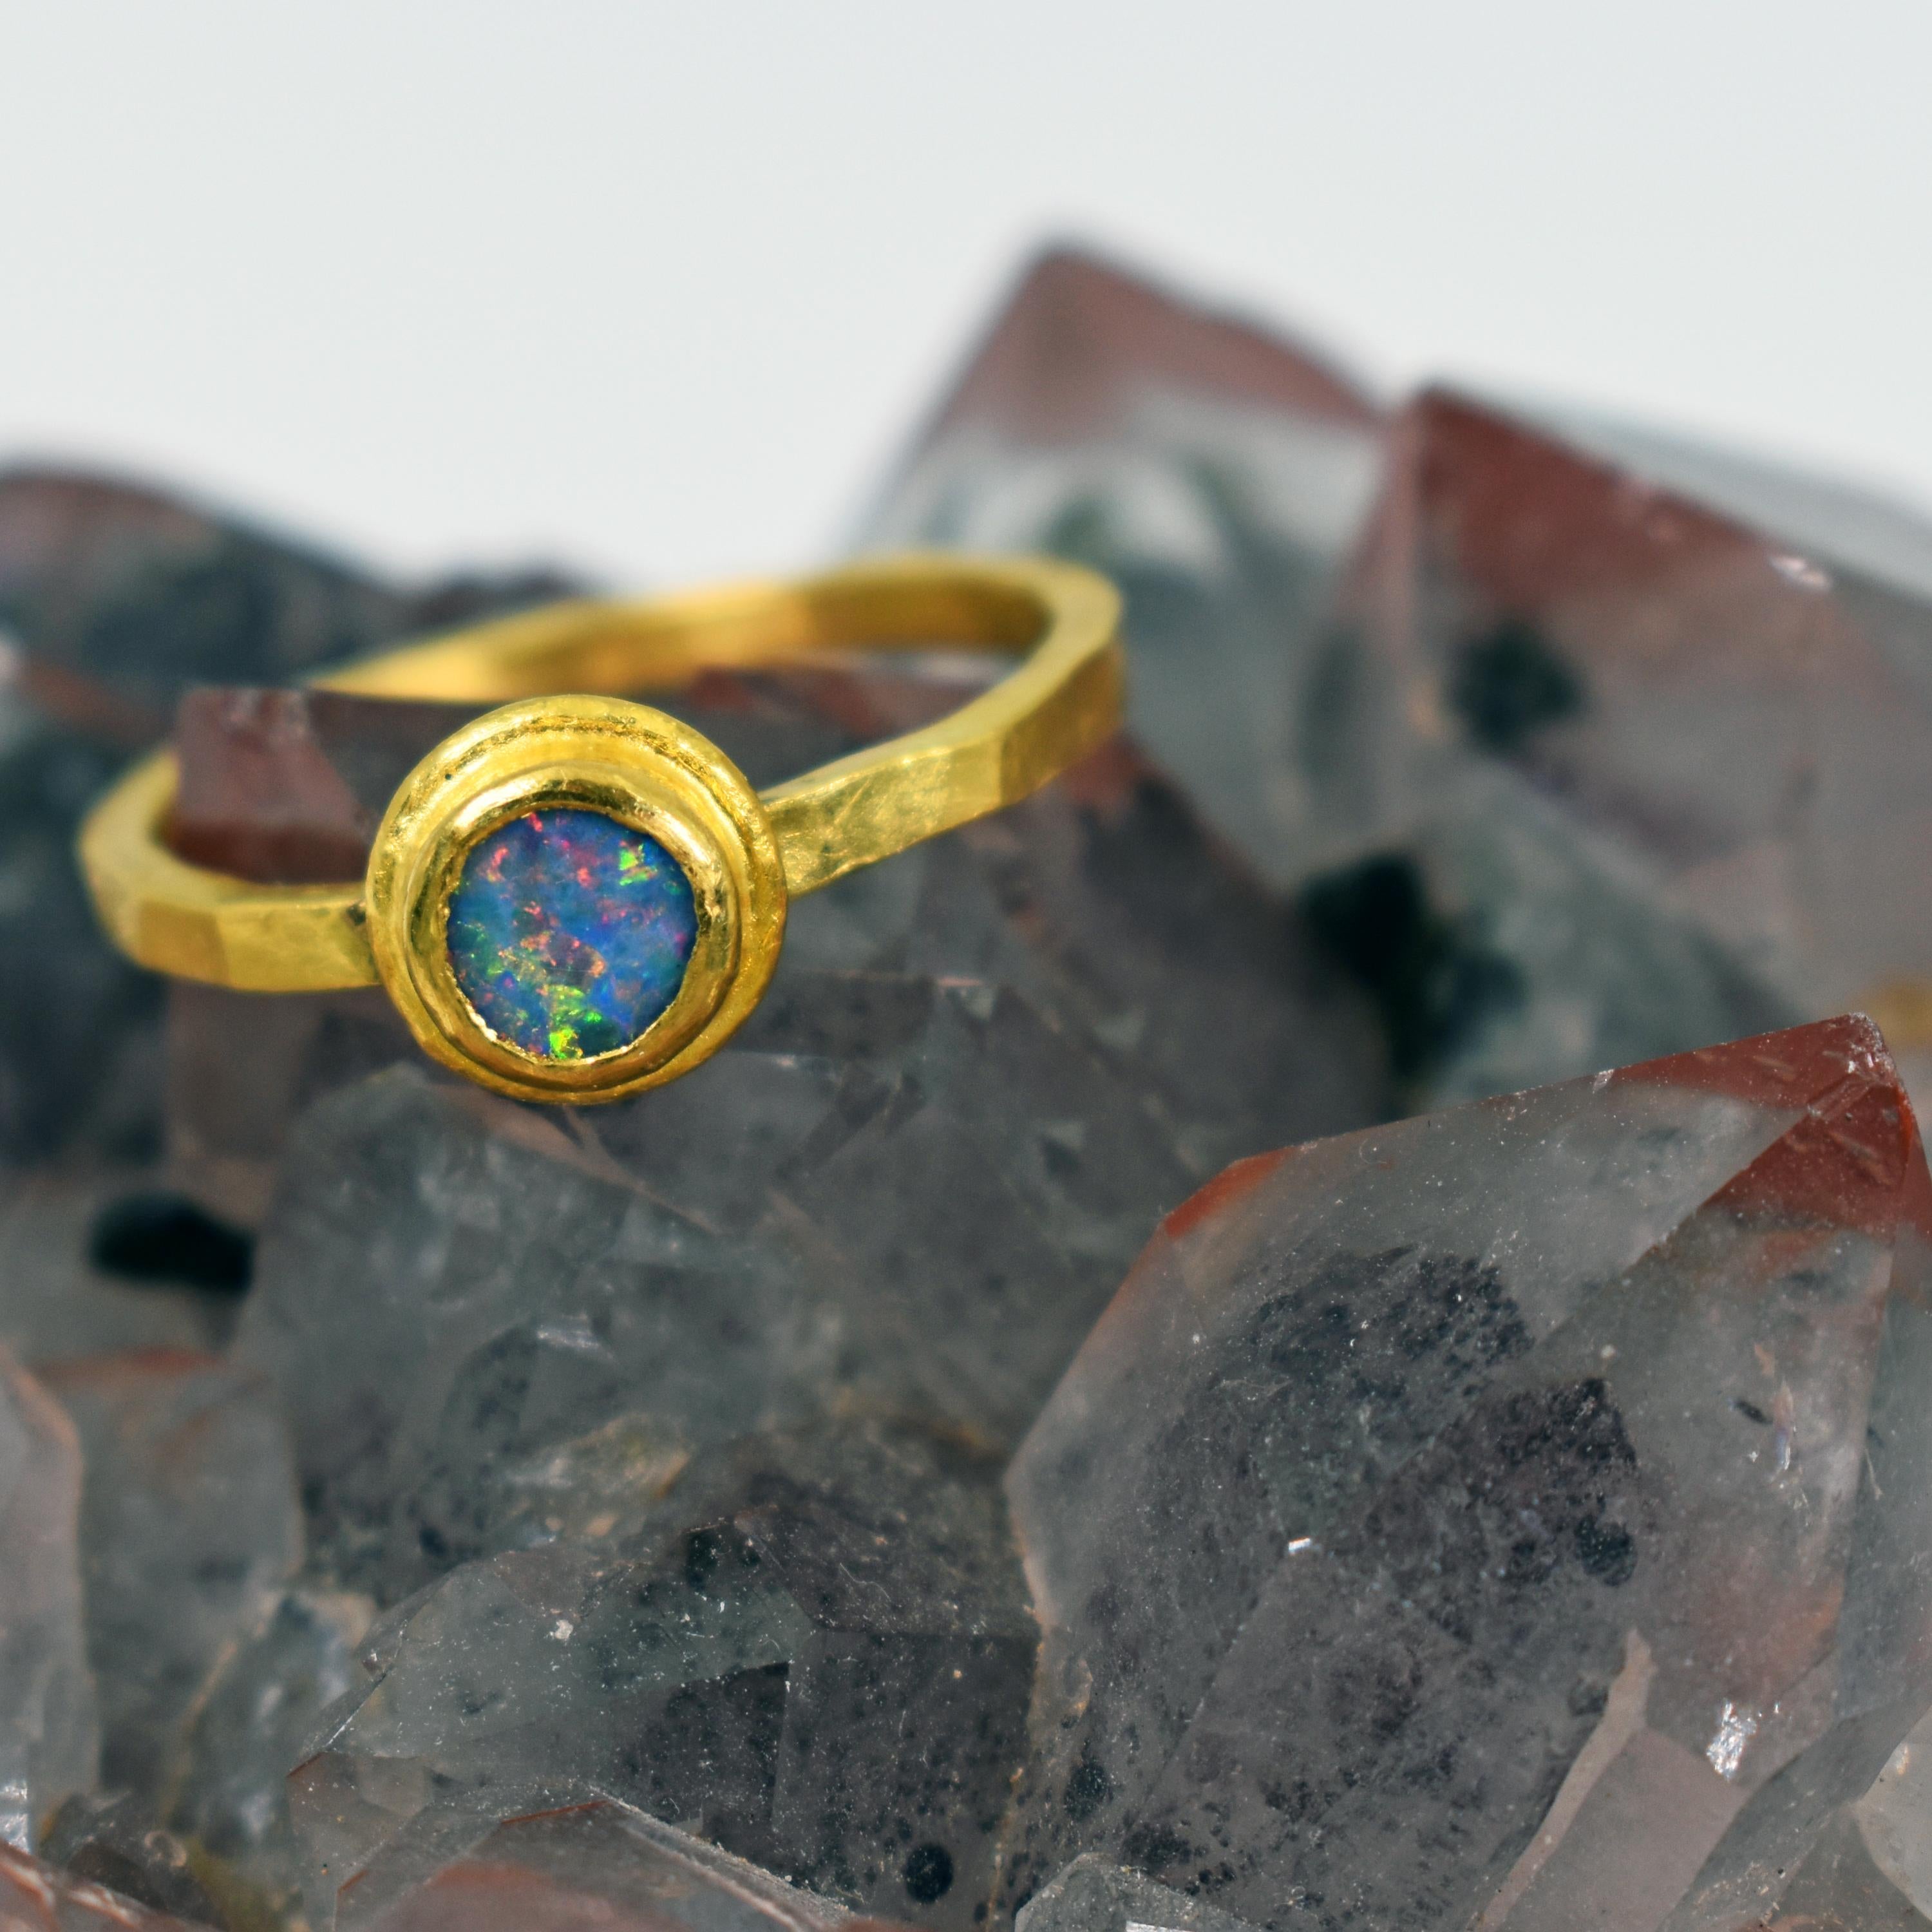 Blue Opal and 22k yellow gold bezel stackable artisan ring. Ring is size 6.5 and is finished with a hammered, satin finish. Contemporary, yet rustic and delicate, minimal ring with a gorgeous, colorful Opal gemstone. 